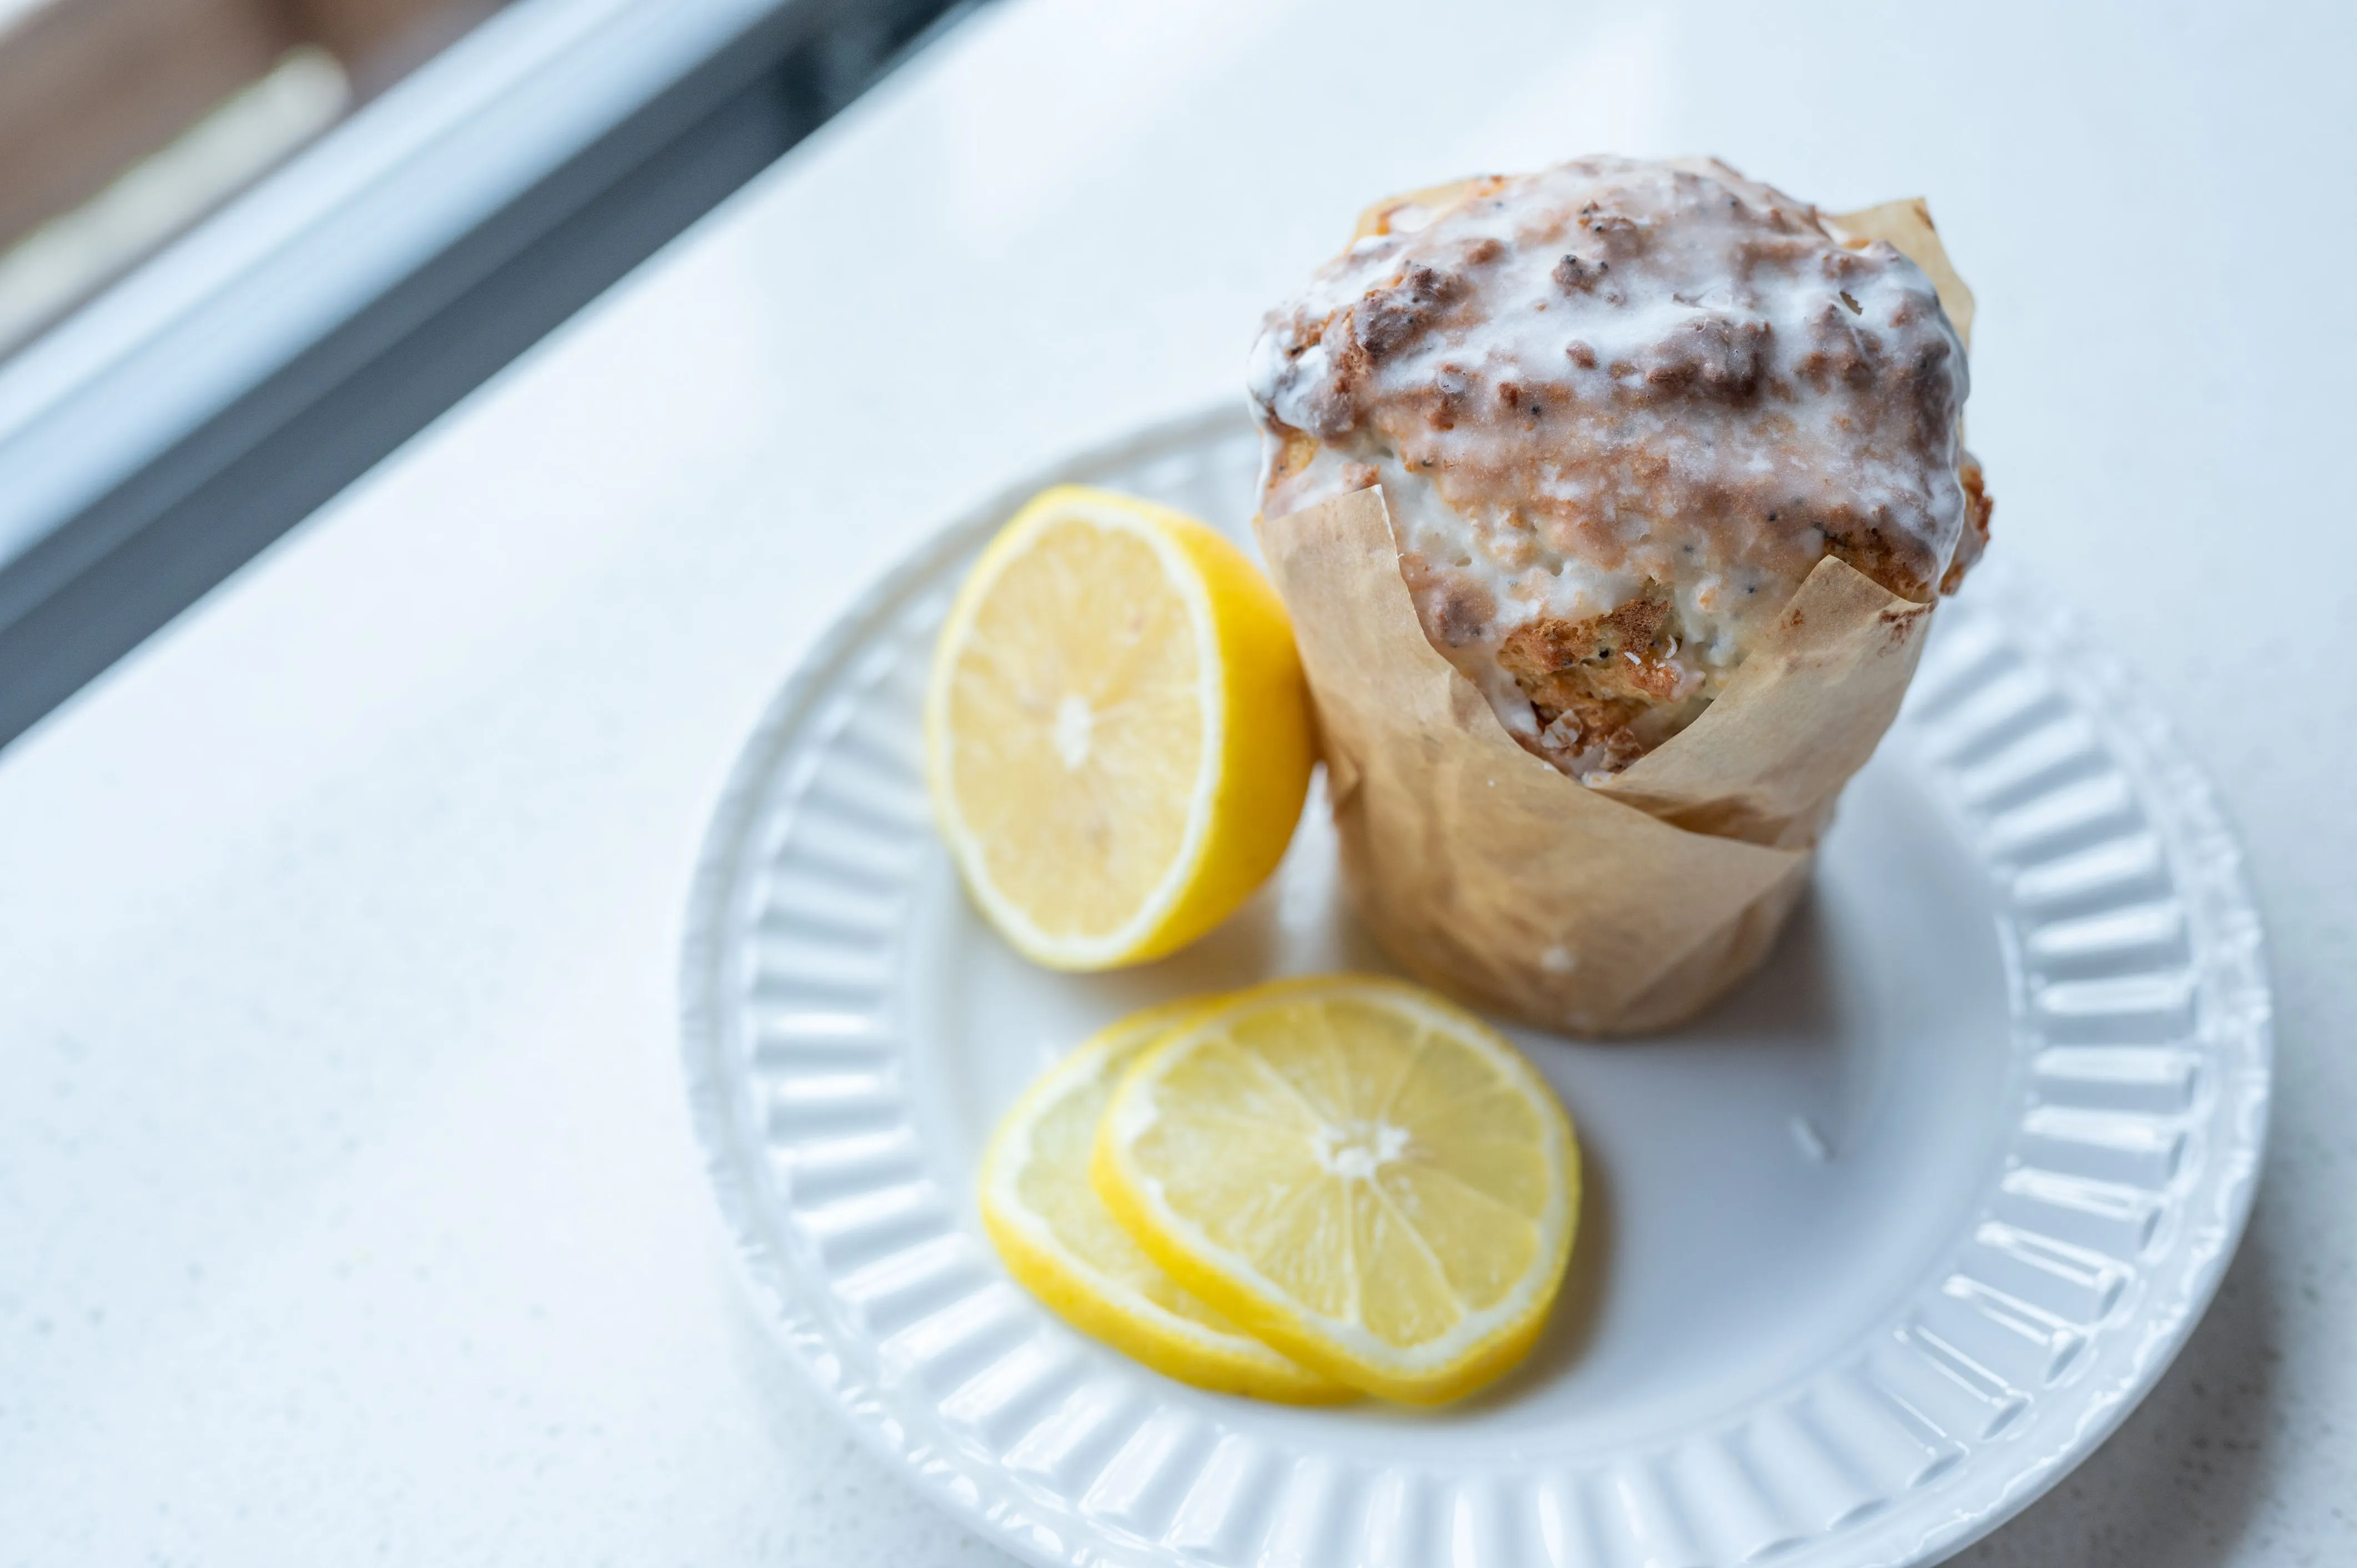 Lemon poppy seed muffin with icing on a white plate accompanied by sliced lemons.